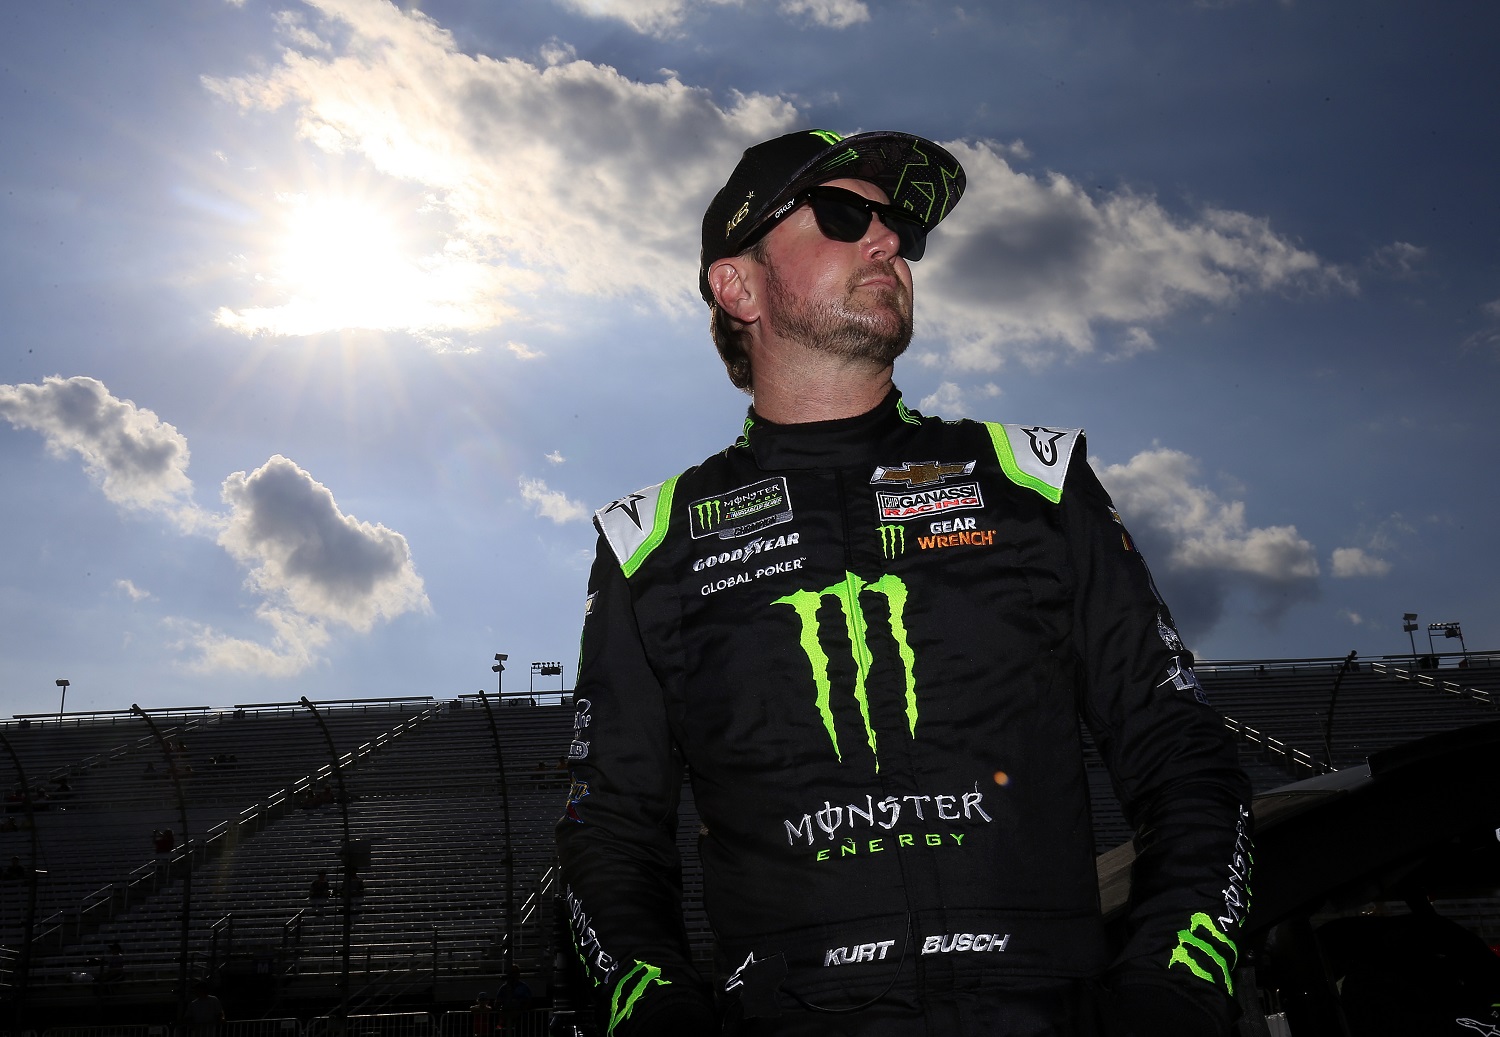 Kurt Busch joined Chip Ganassi Racing in 2019 but does not have a contract for next season. | Chris Trotman/Getty Images